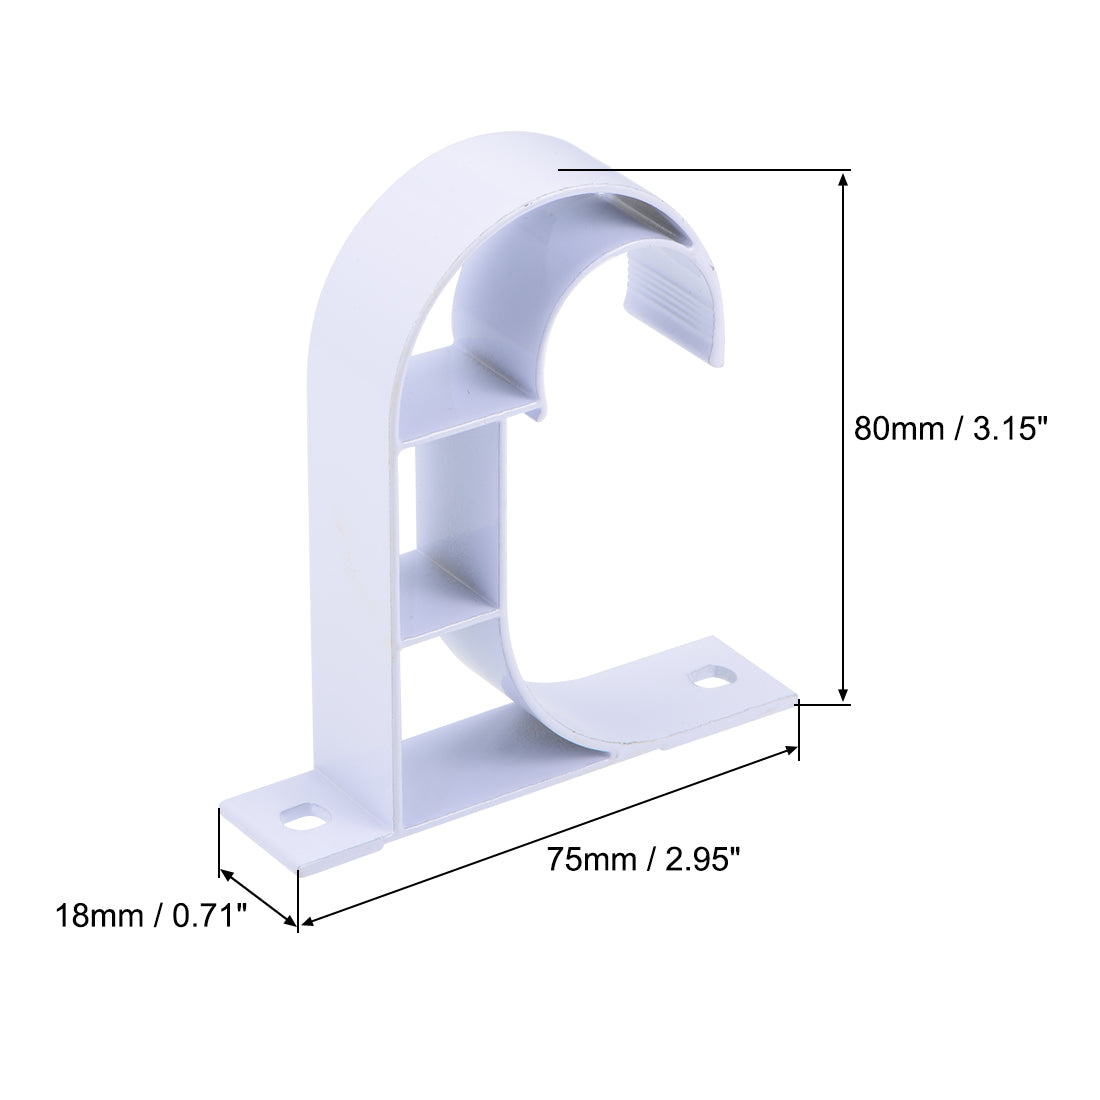 uxcell Uxcell Curtain Rod Bracket Aluminum Alloy Single Holder Support for 25mm Drapery Rod 80 x 75 x 18mm White 6Pcs